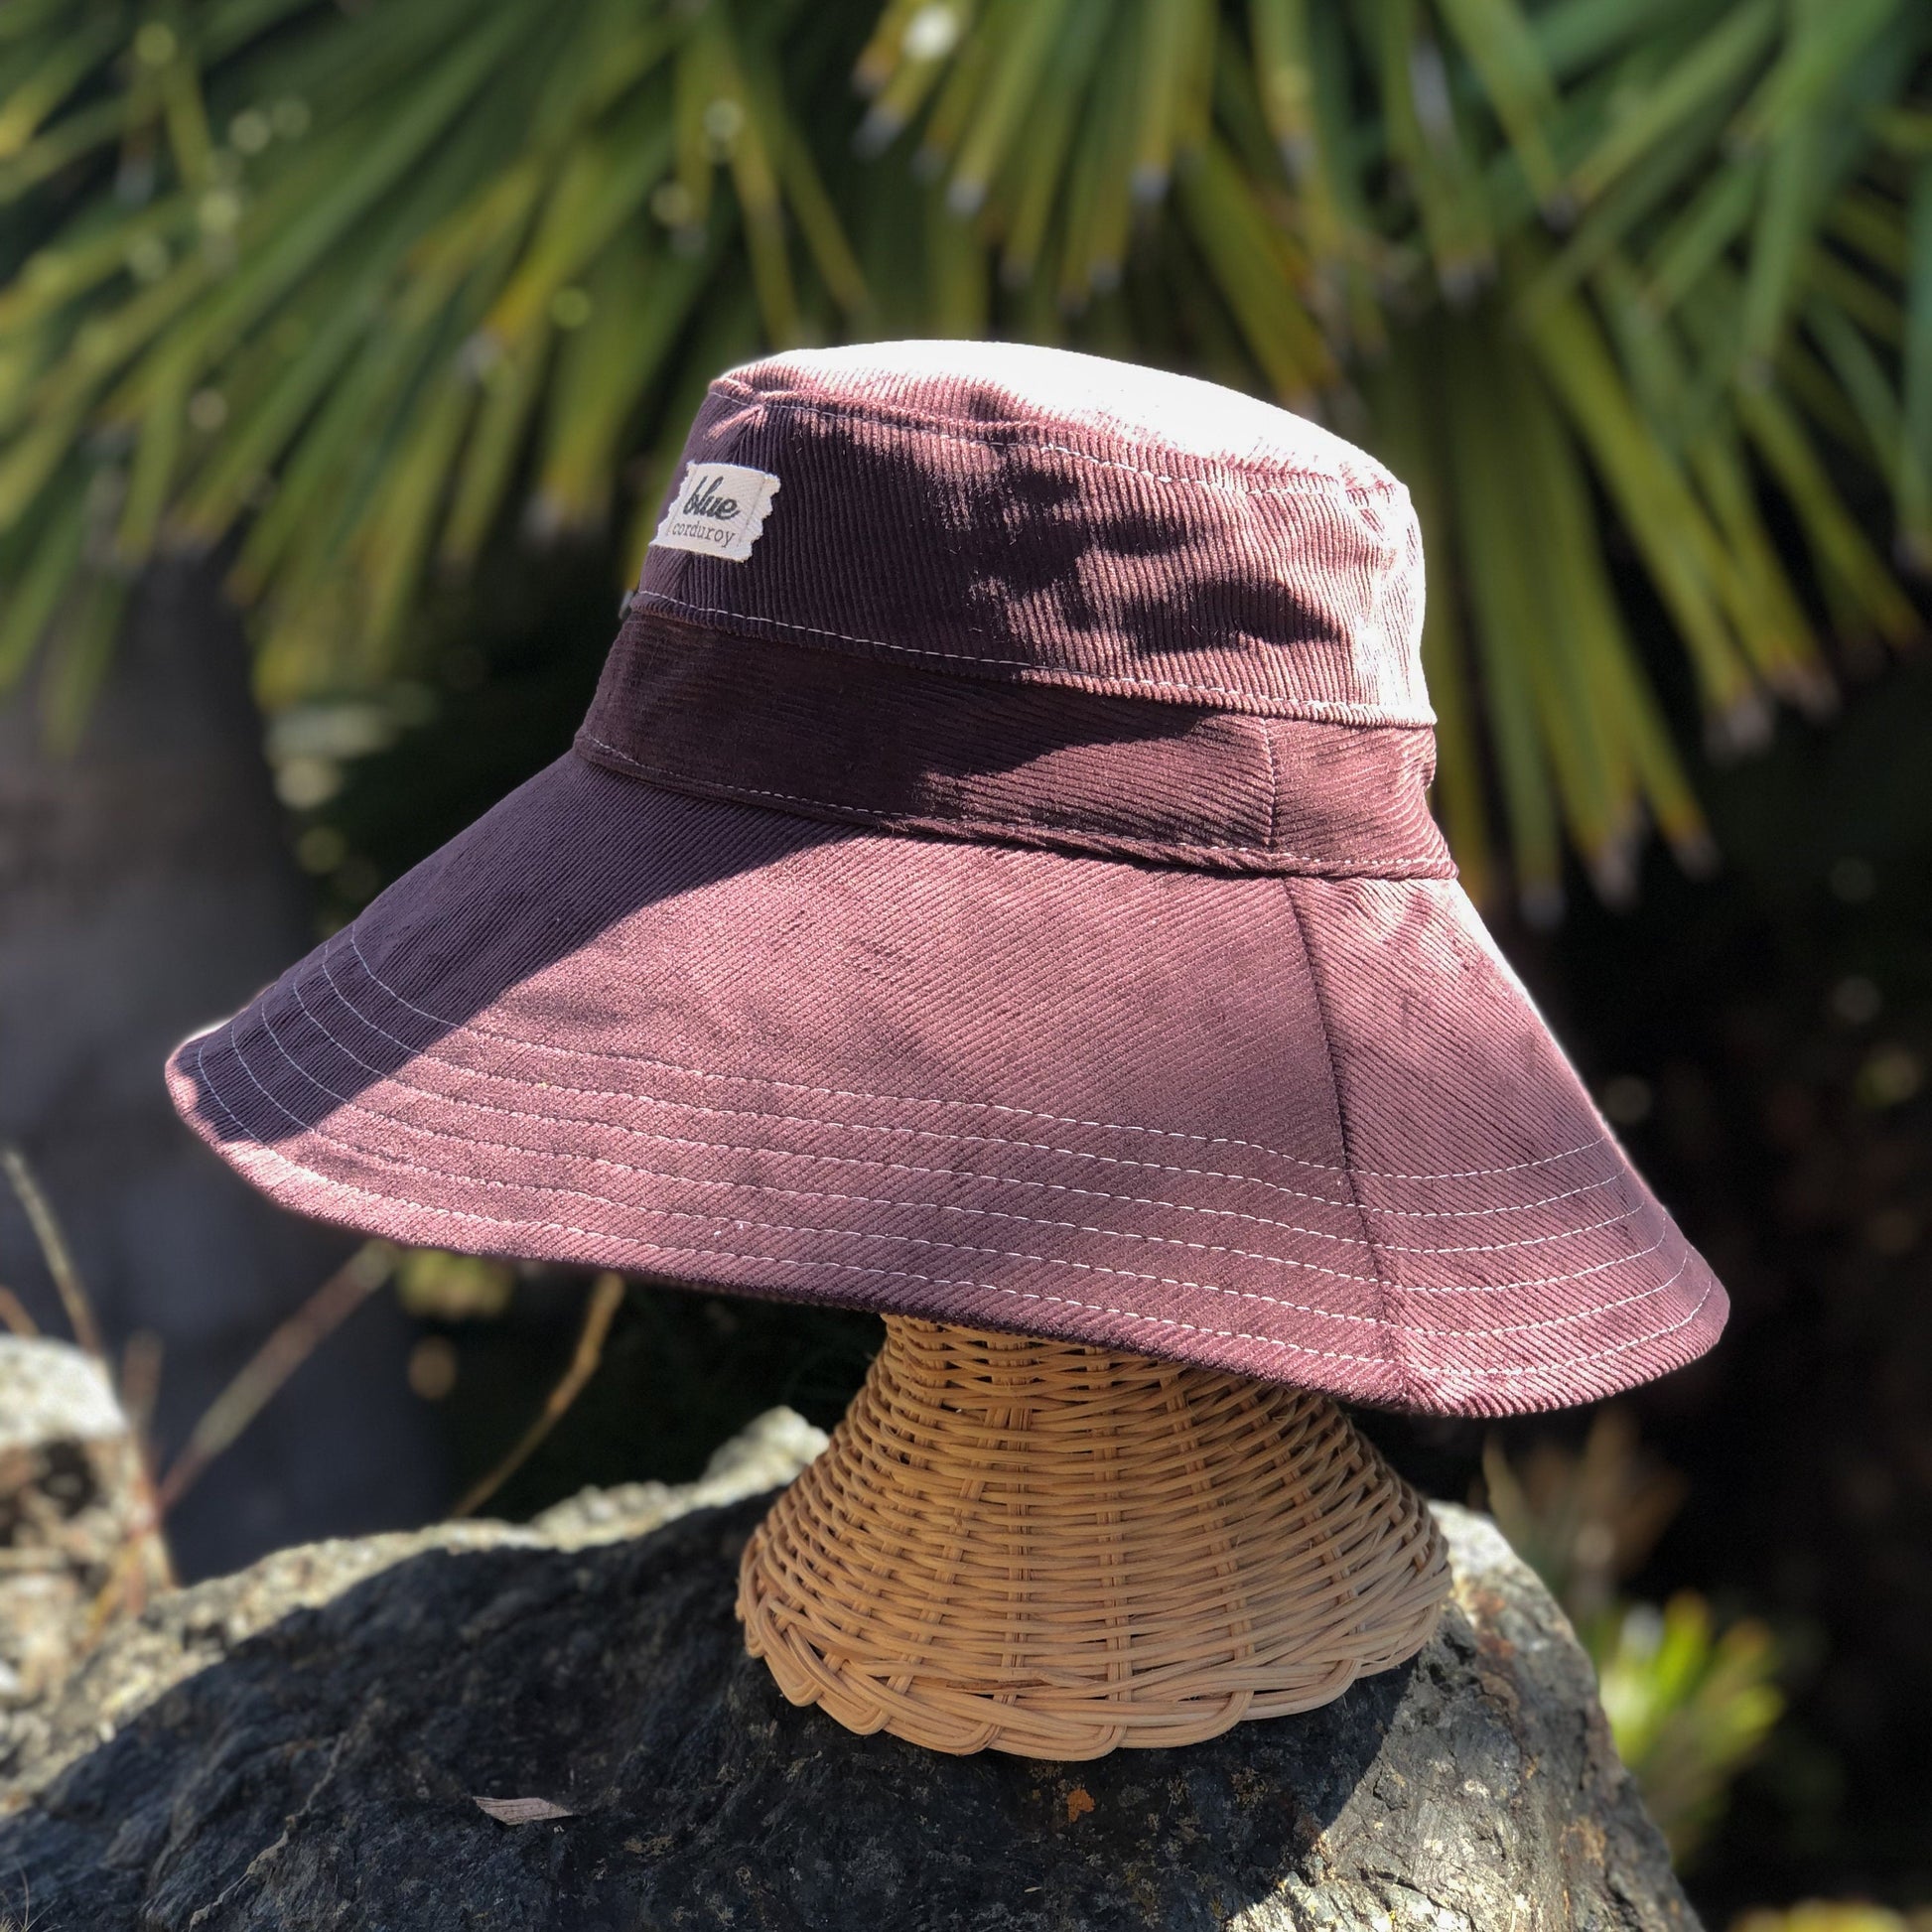 Wide Brim Hat for Women, Corduroy Bucket Hat, Foldable Beach Hat, Fall Accessories for Her, Winter Sun Hat, Cotton Cloth Sun Hat, brown hat